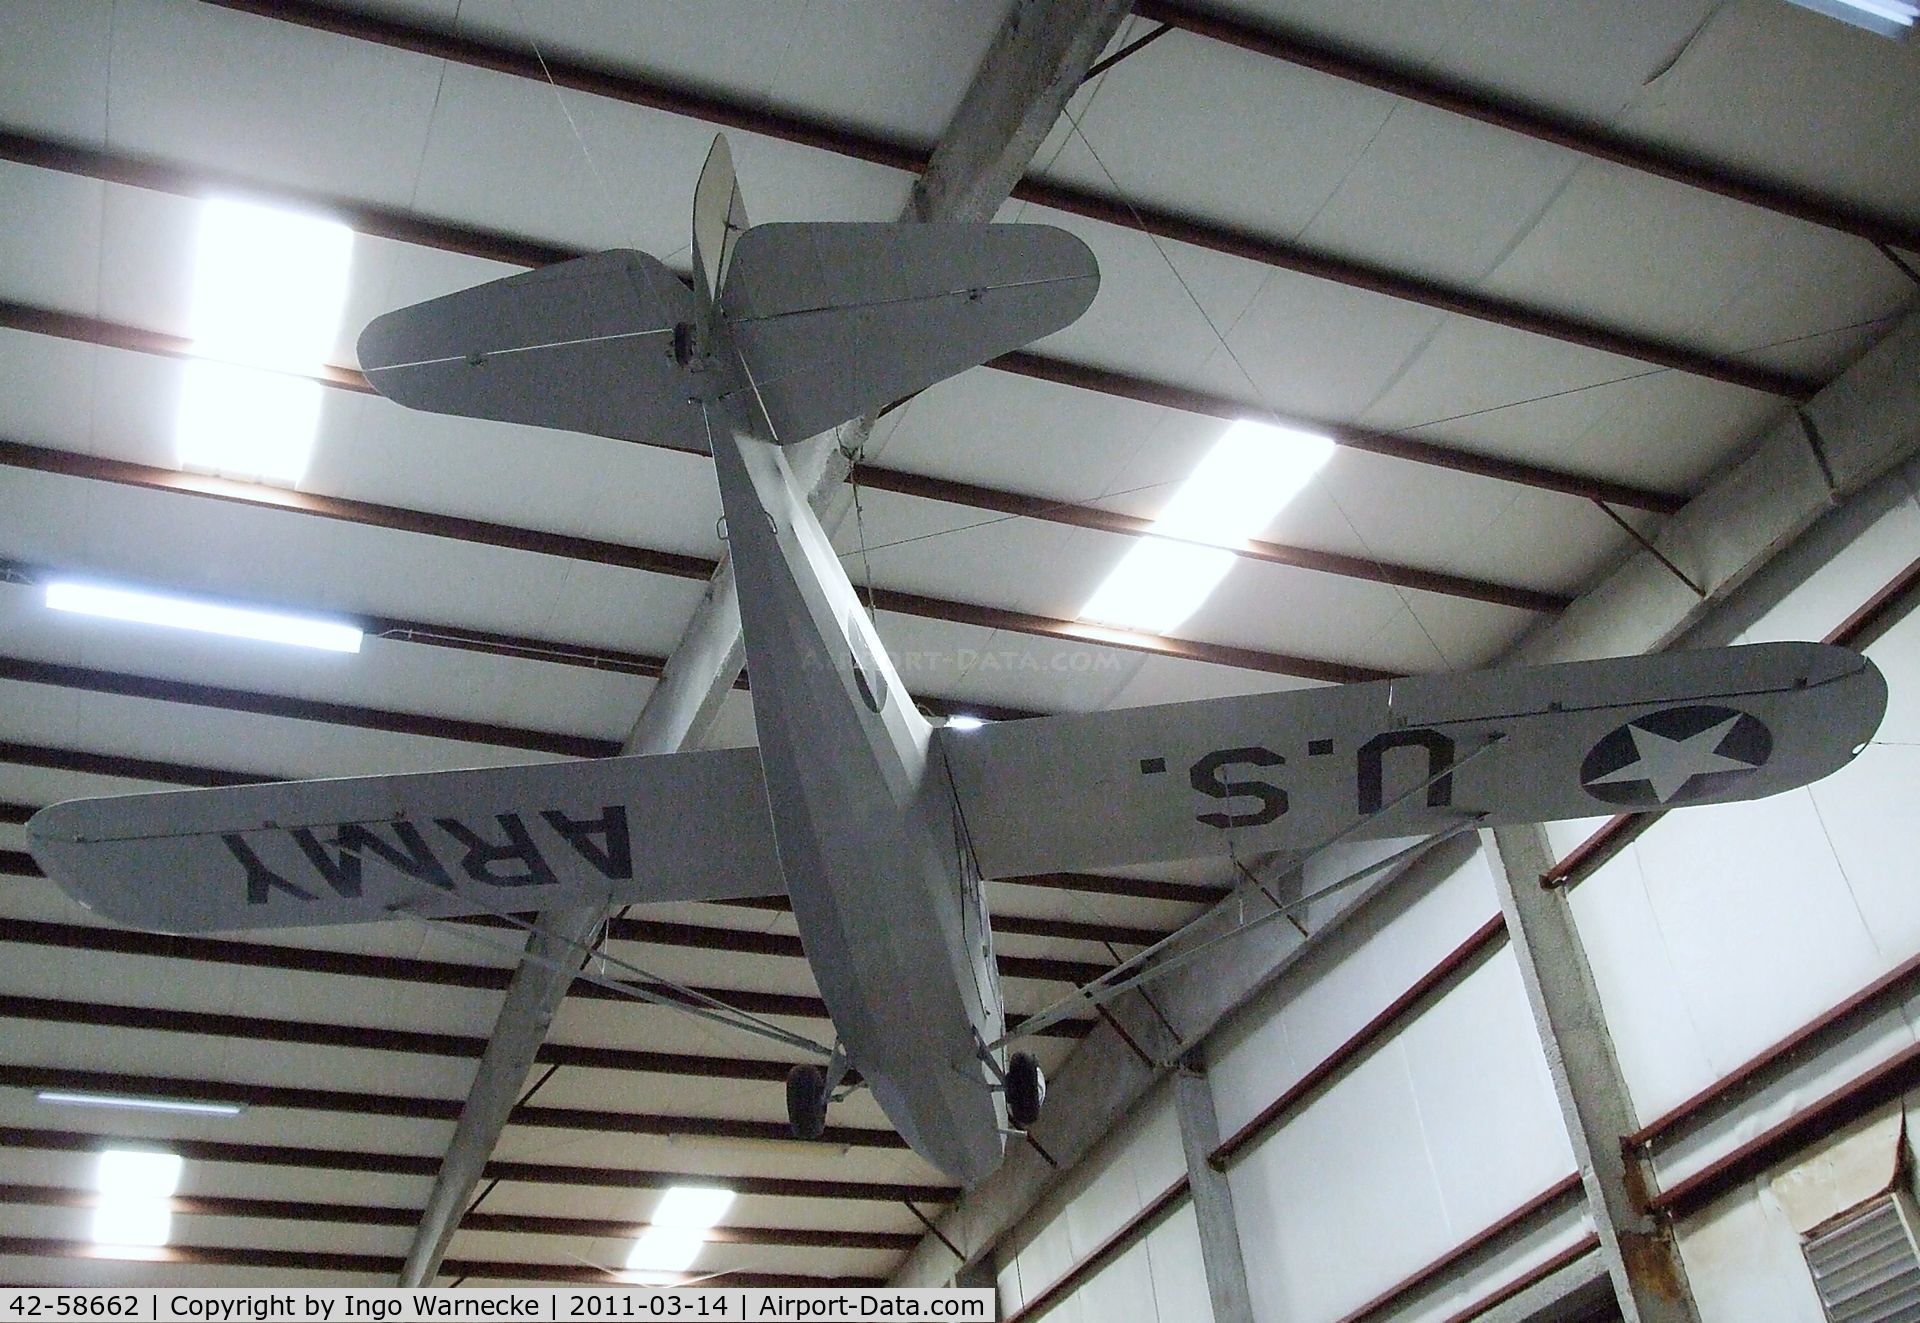 42-58662, 1942 Taylorcraft TG-6 C/N Not found, Taylorcraft DC-65 (converted to TG-6) at the Pima Air & Space Museum, Tucson AZ